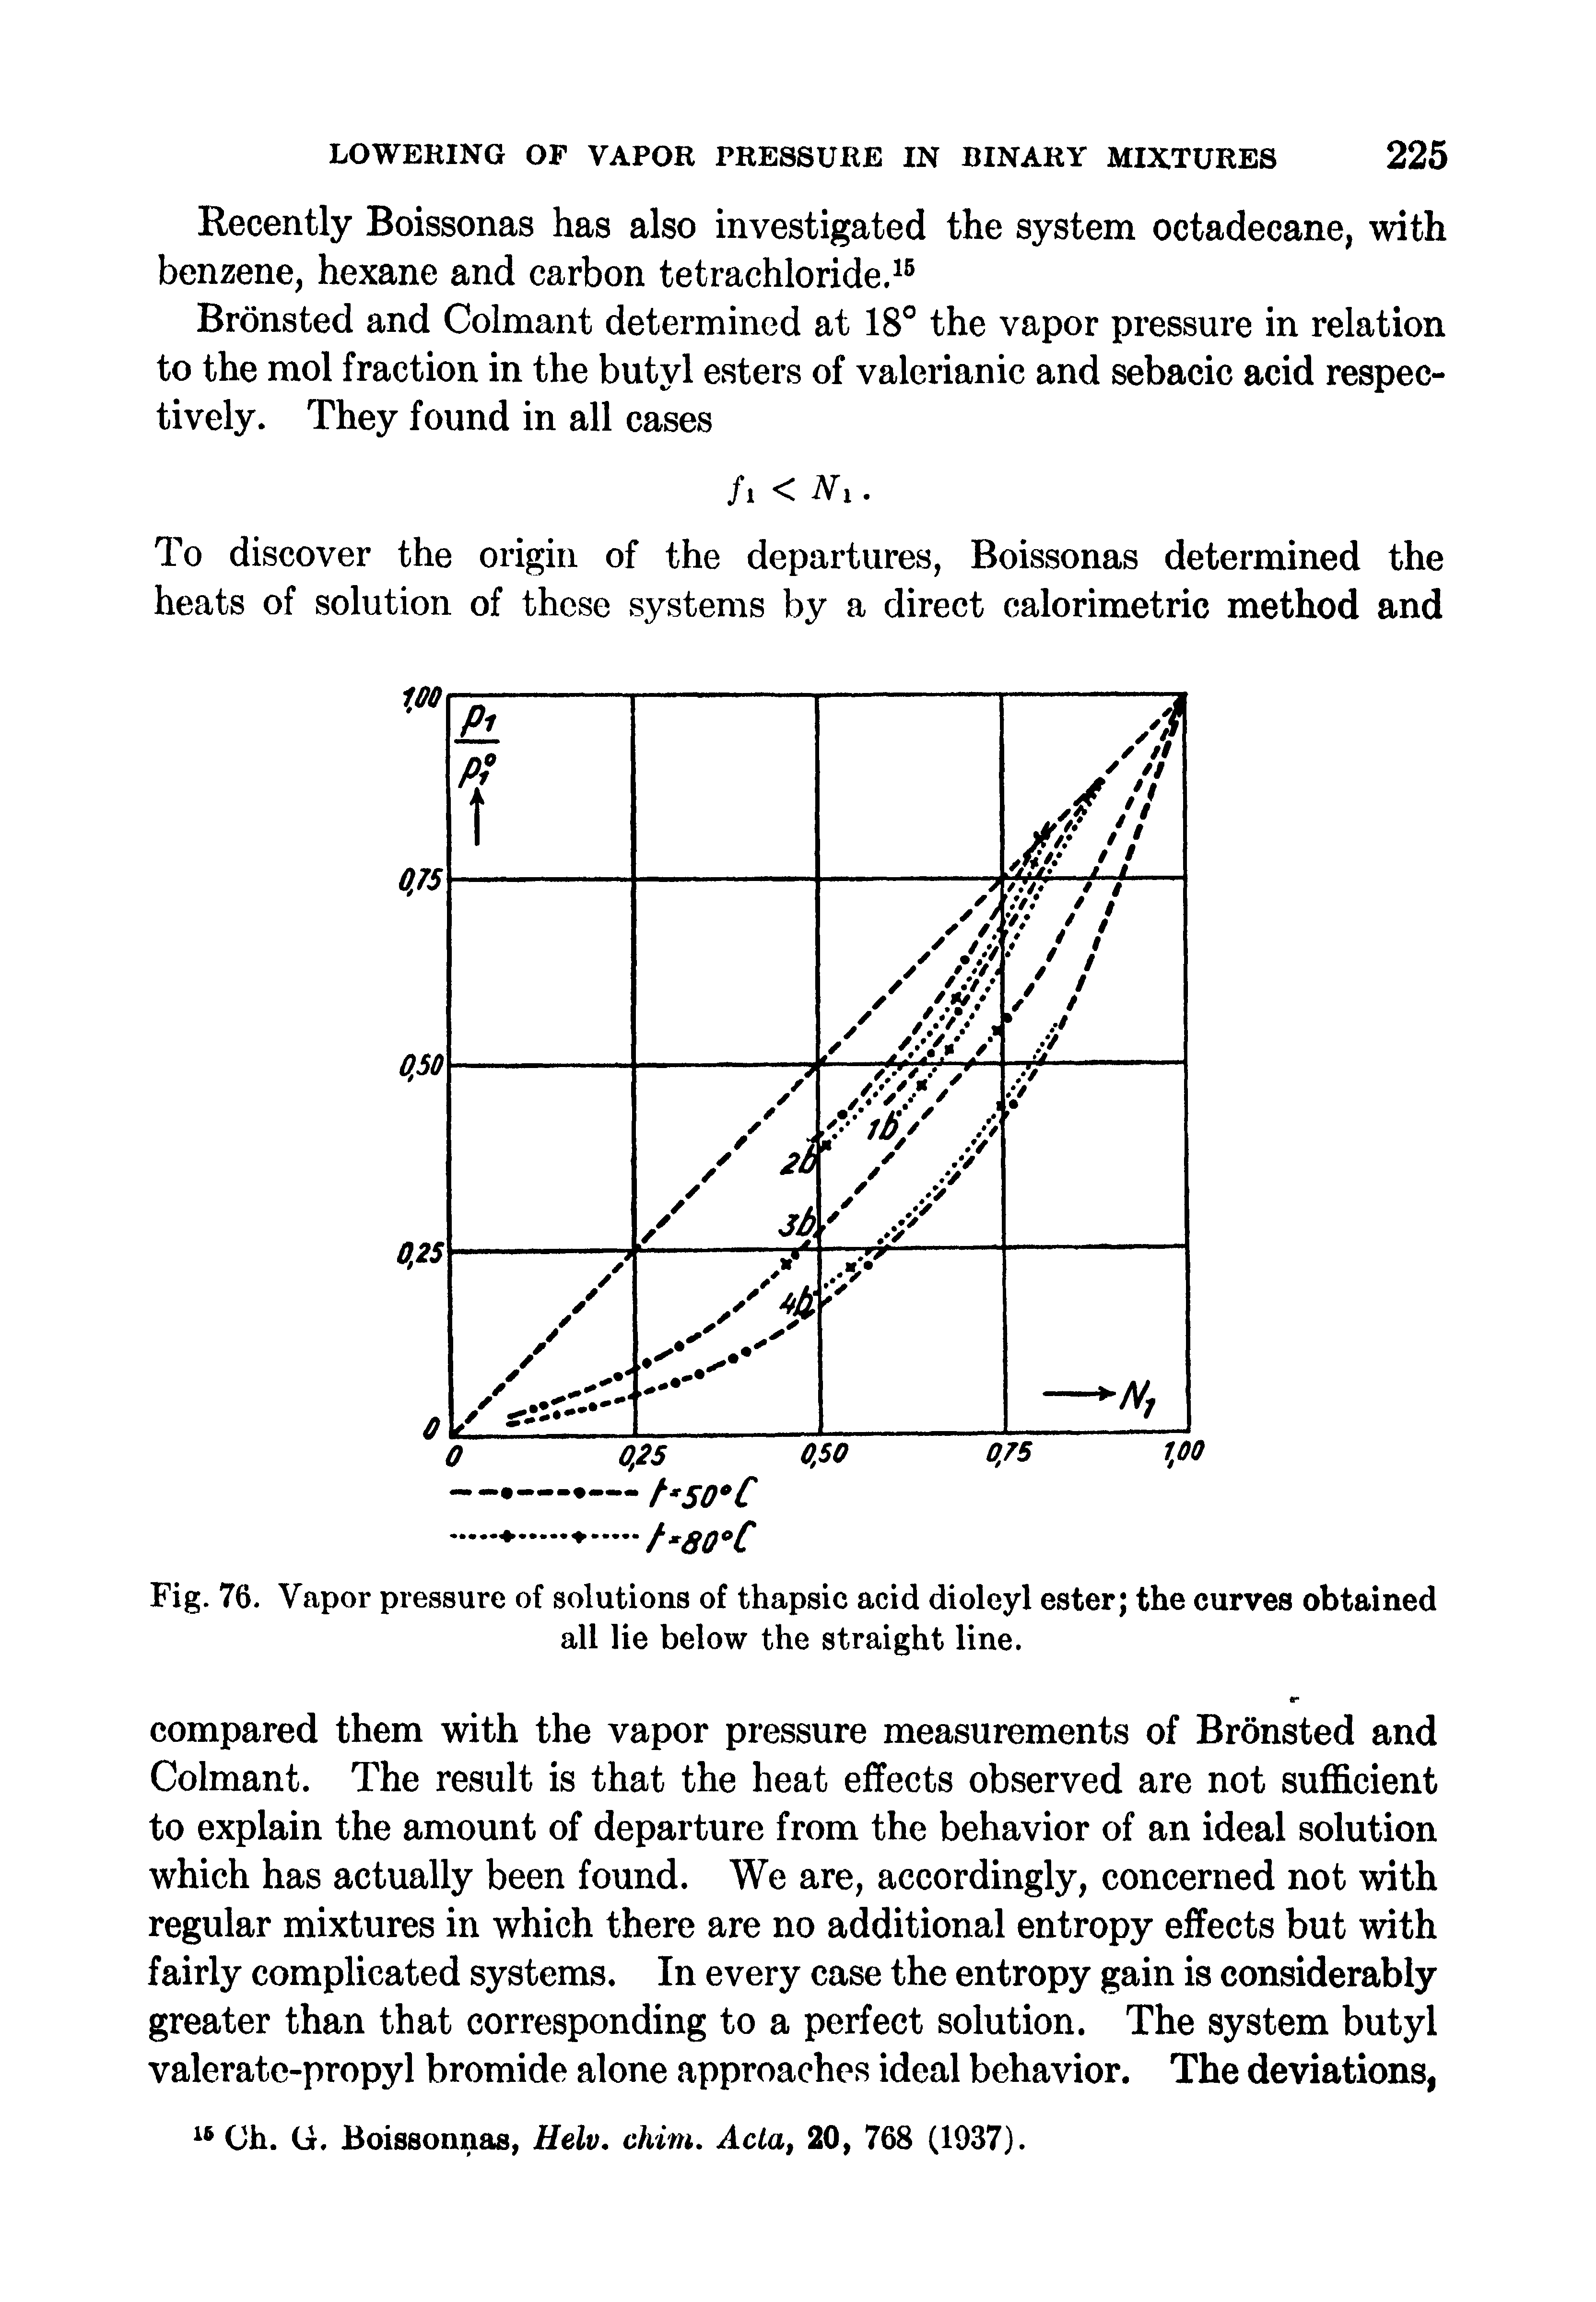 Fig. 76. Vapor pressure of solutions of thapsic acid dioleyl ester the curves obtained all lie below the straight line.